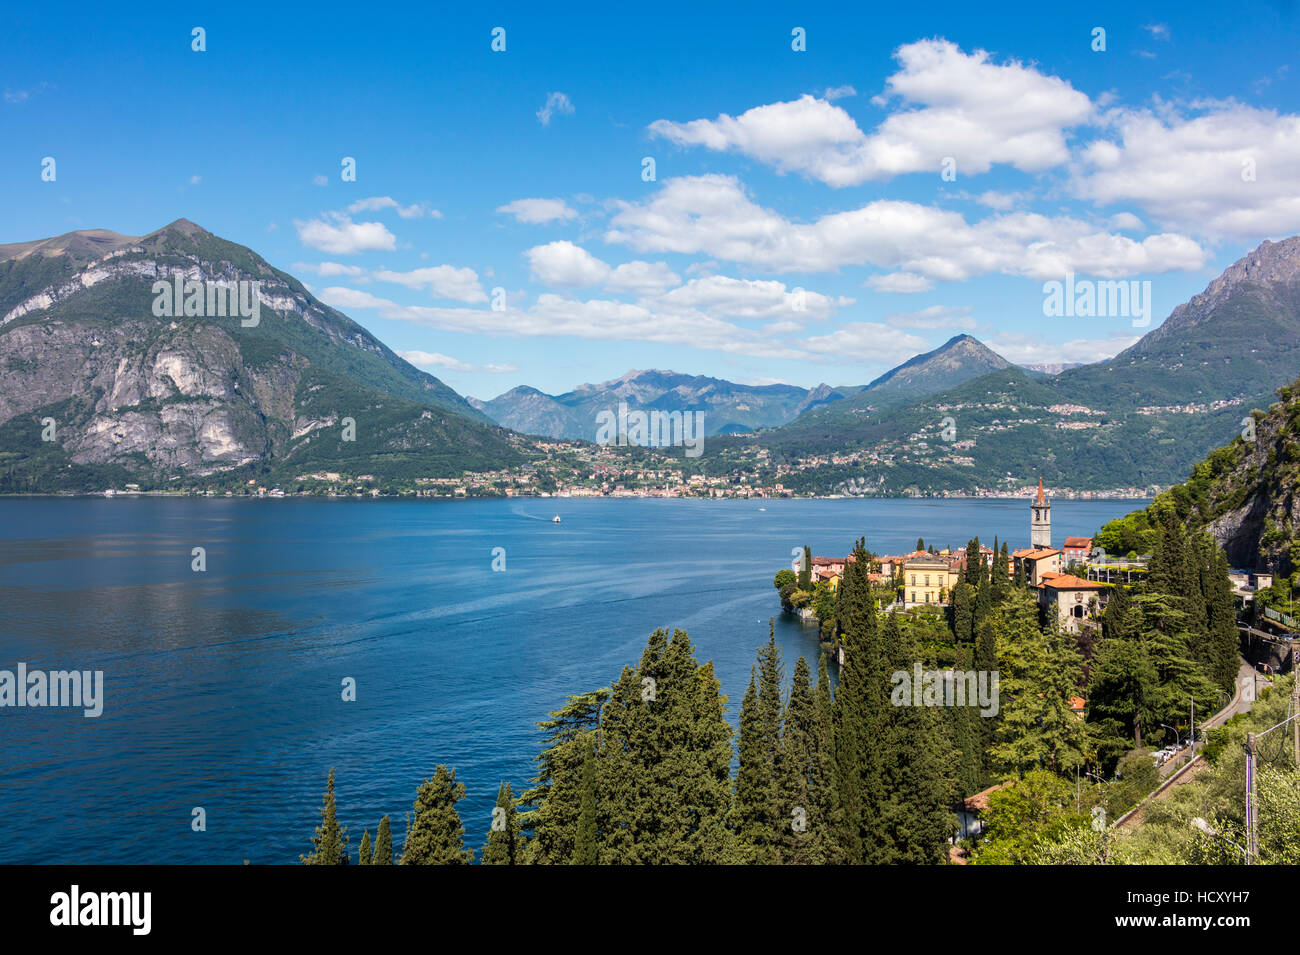 View of the typical village of Varenna and Lake Como surrounded by mountains, Province of Lecco, Italian Lakes, Lombardy, Italy Stock Photo